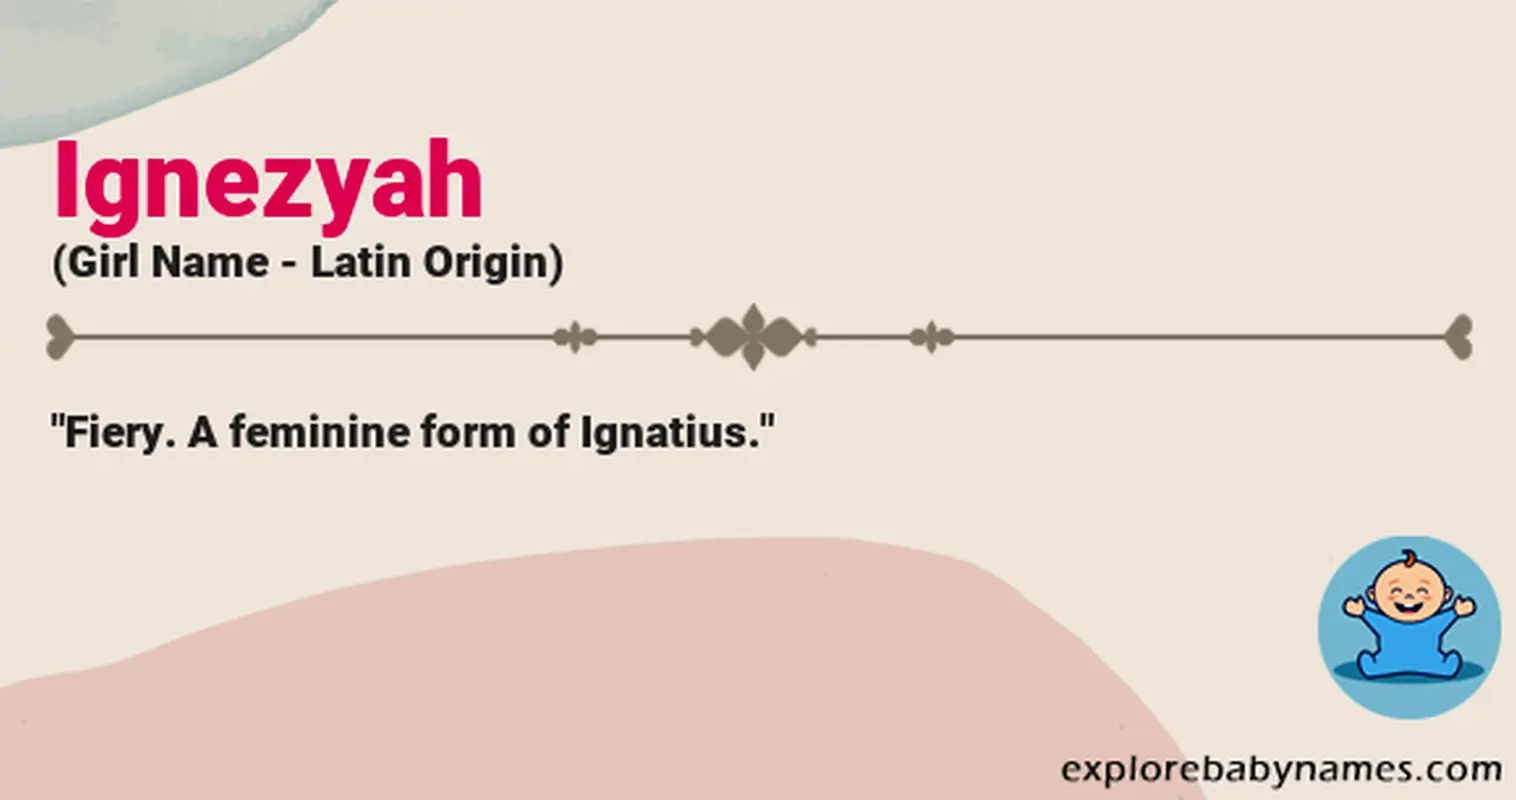 Meaning of Ignezyah